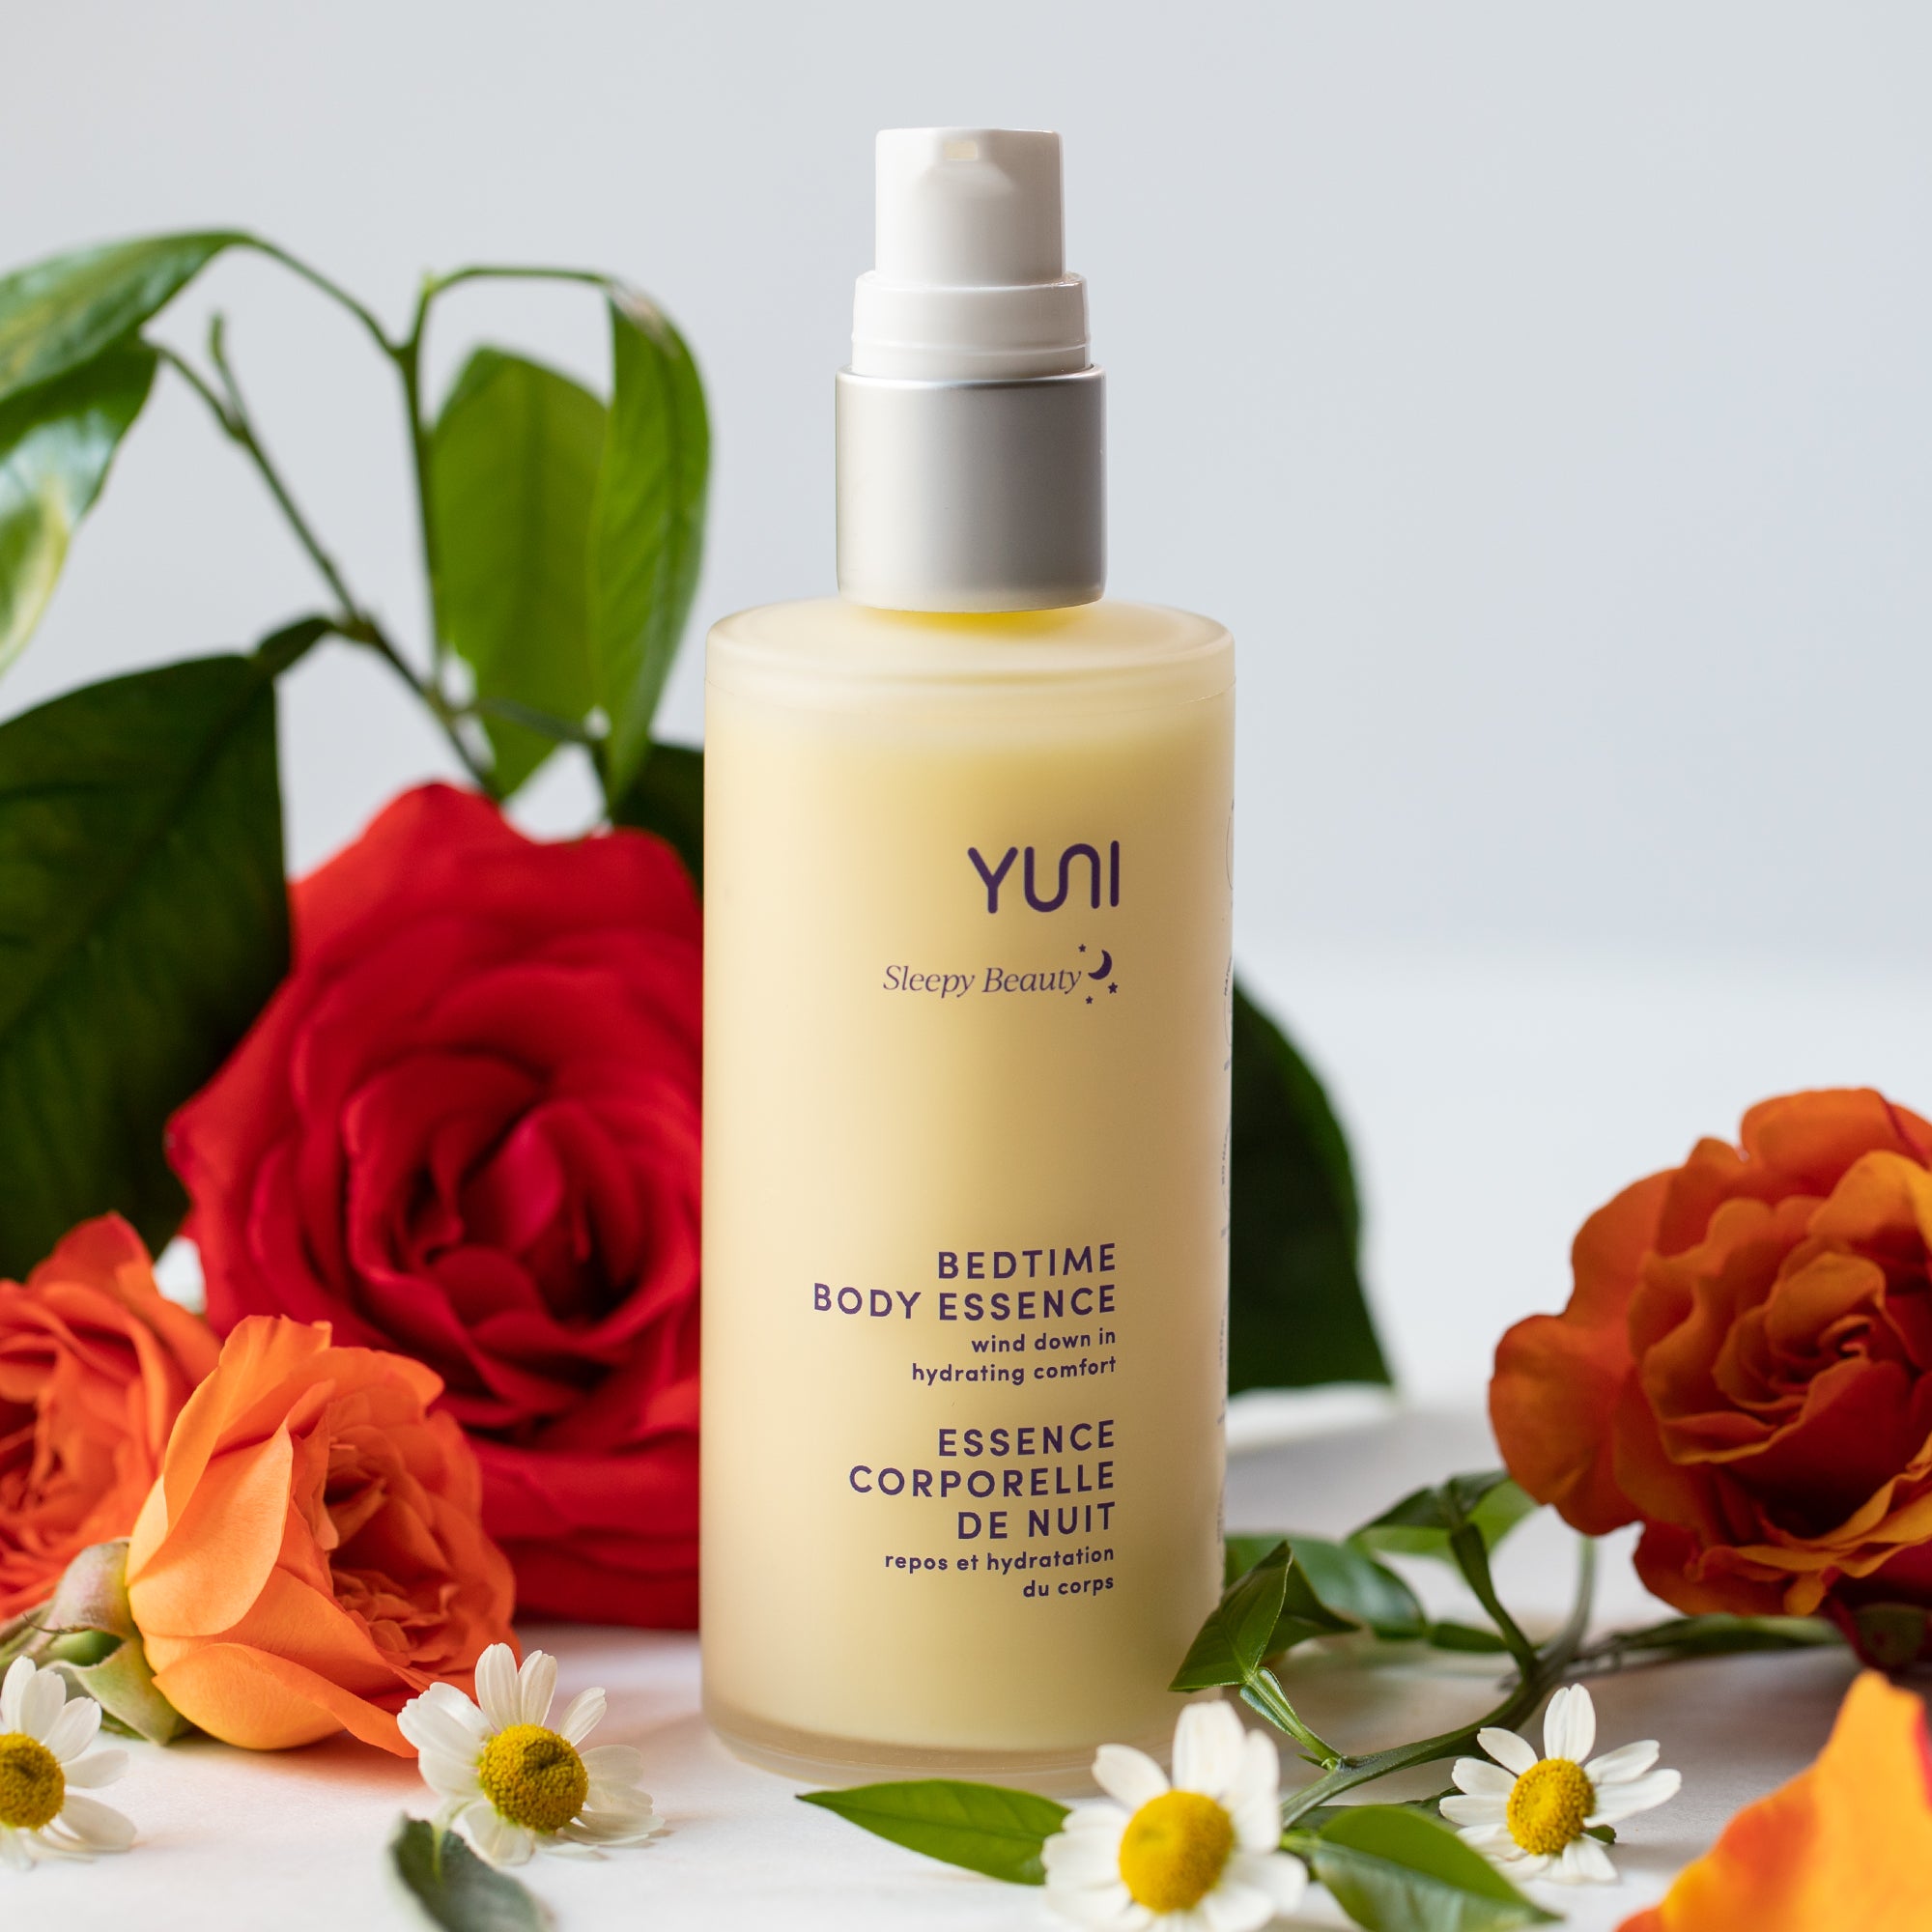 Natural Beauty Products She’ll Love as Her Valentine’s Day Gift